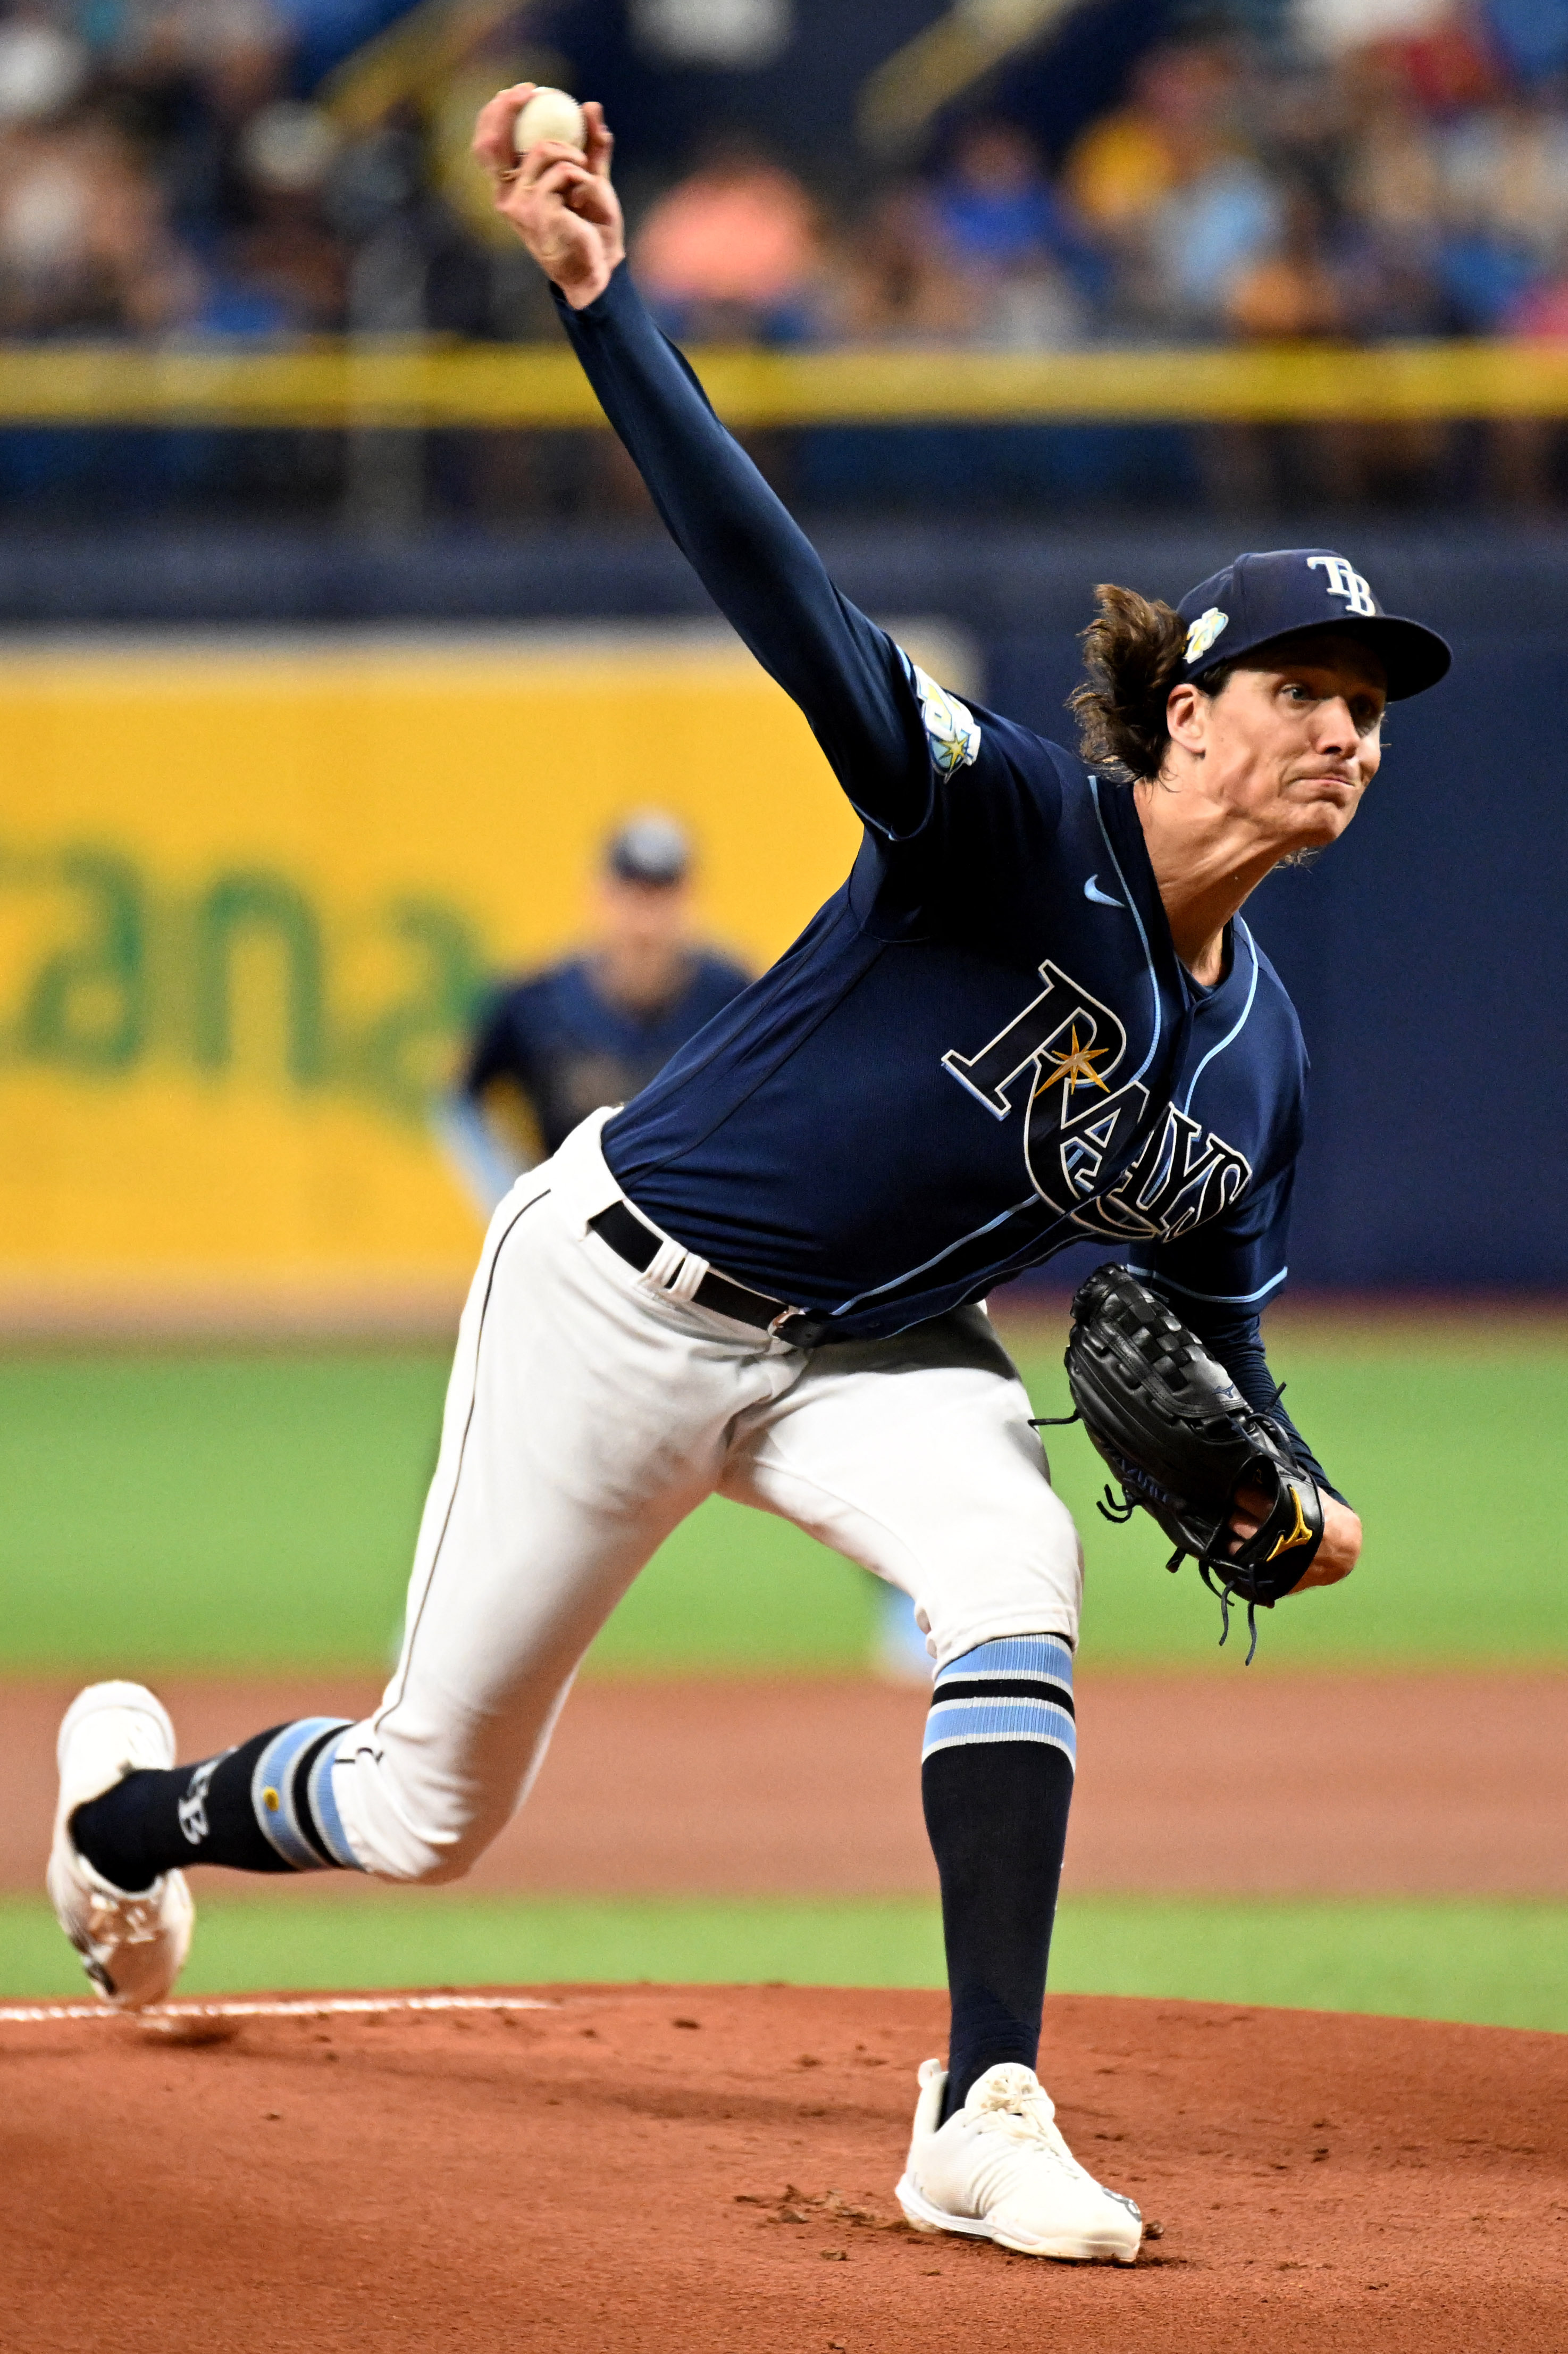 Tyler Glasnow's strong outing carries Rays past Marlins